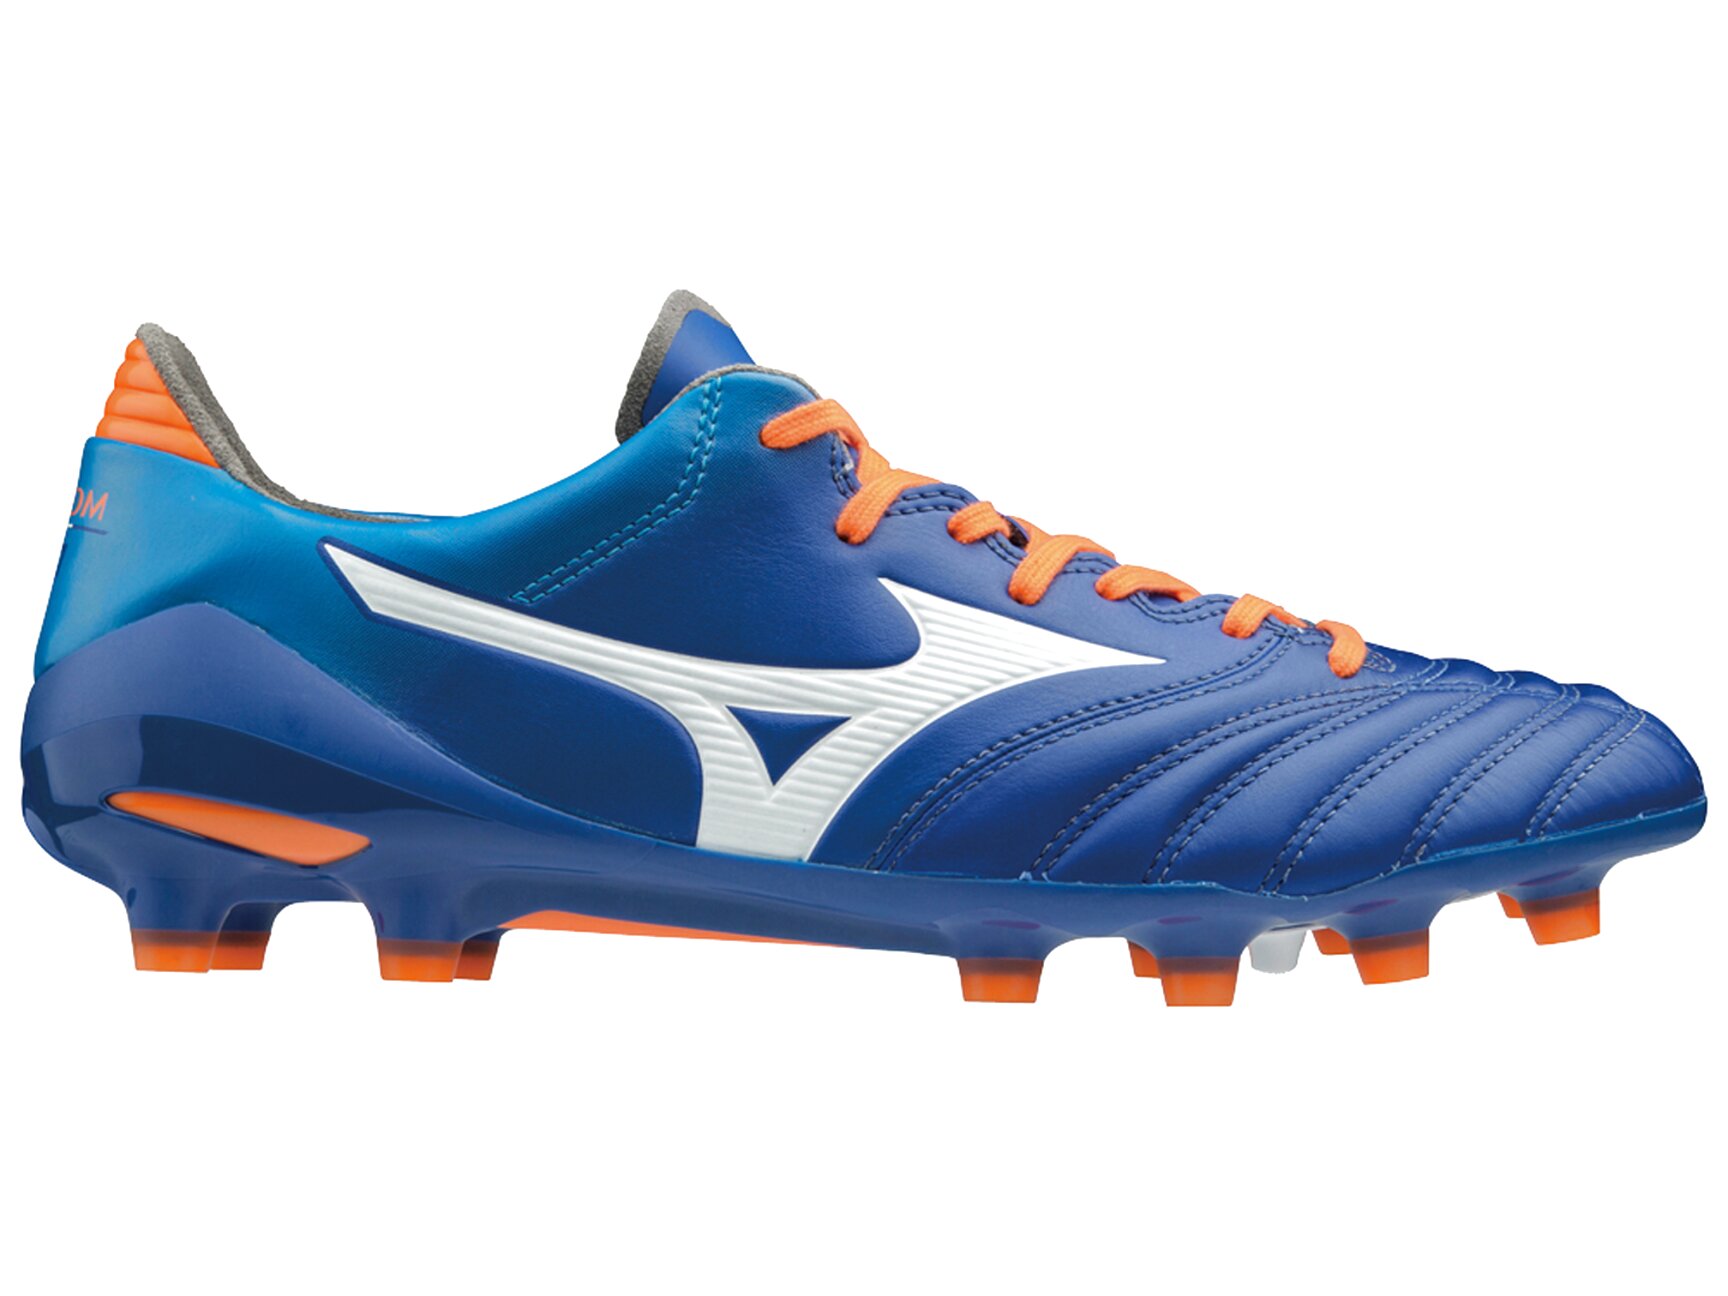 Mizuno Football Boots for sale in UK | 59 used Mizuno Football Boots